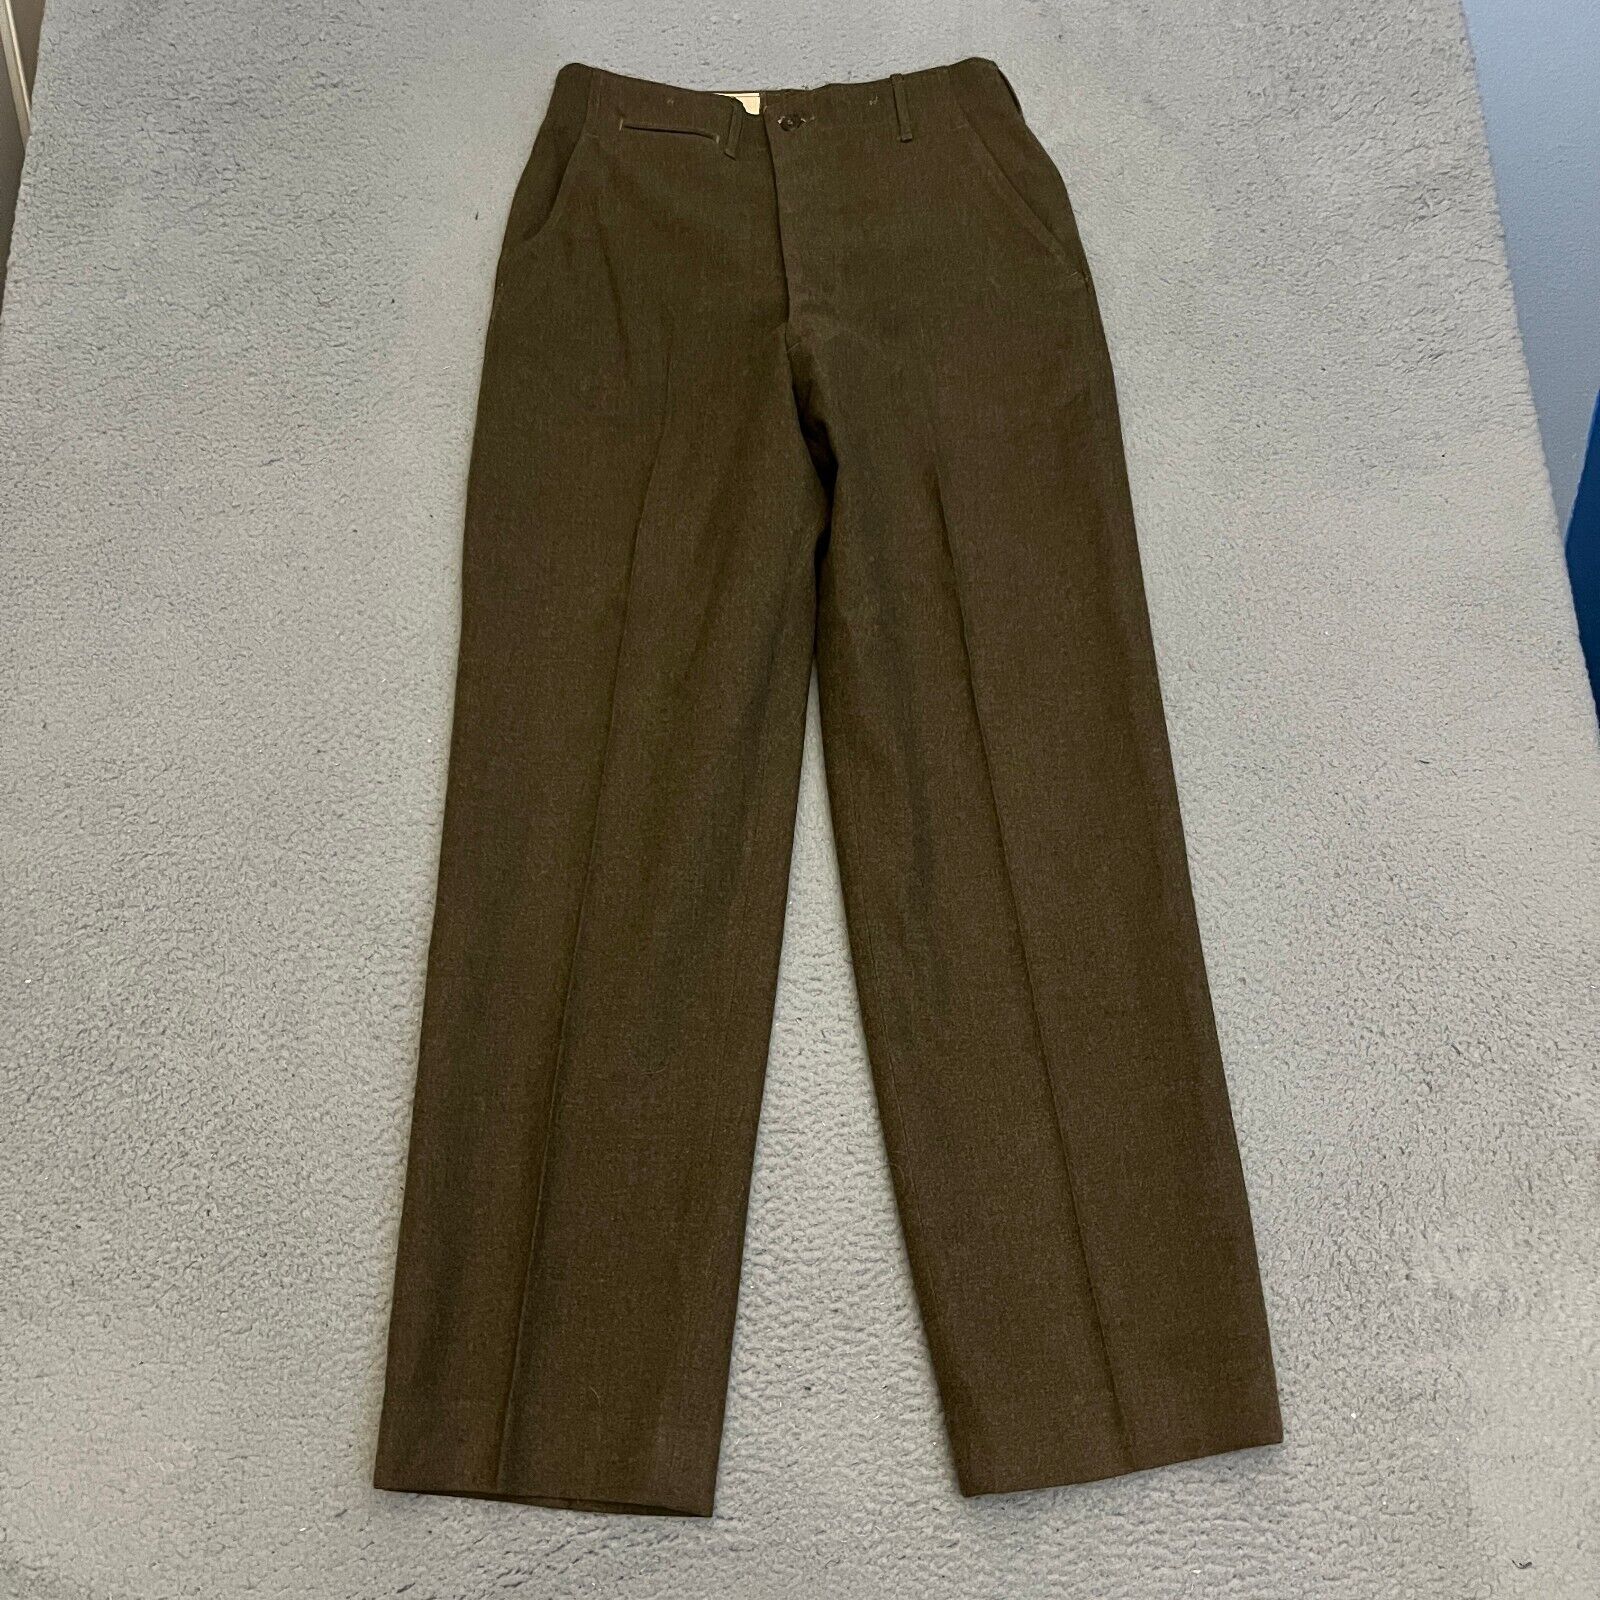 Vintage US Military Trousers Mens Size 31 x 33 Green Wool Pants